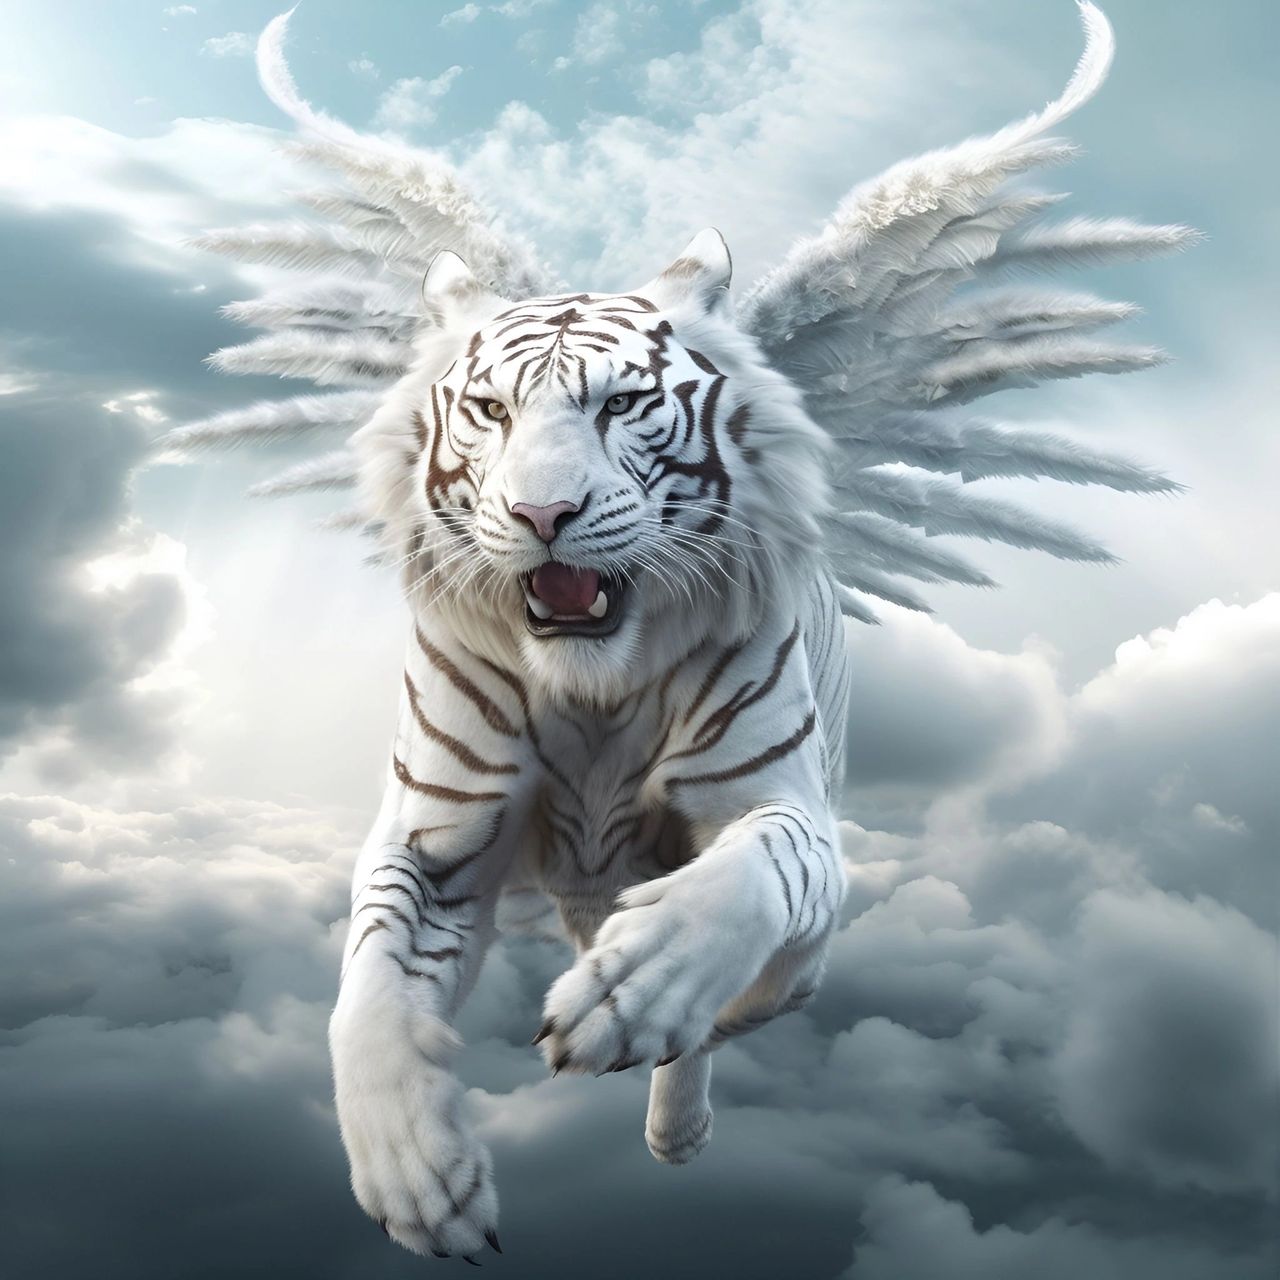 THE MIRACLE TIGER IN FLIGHT